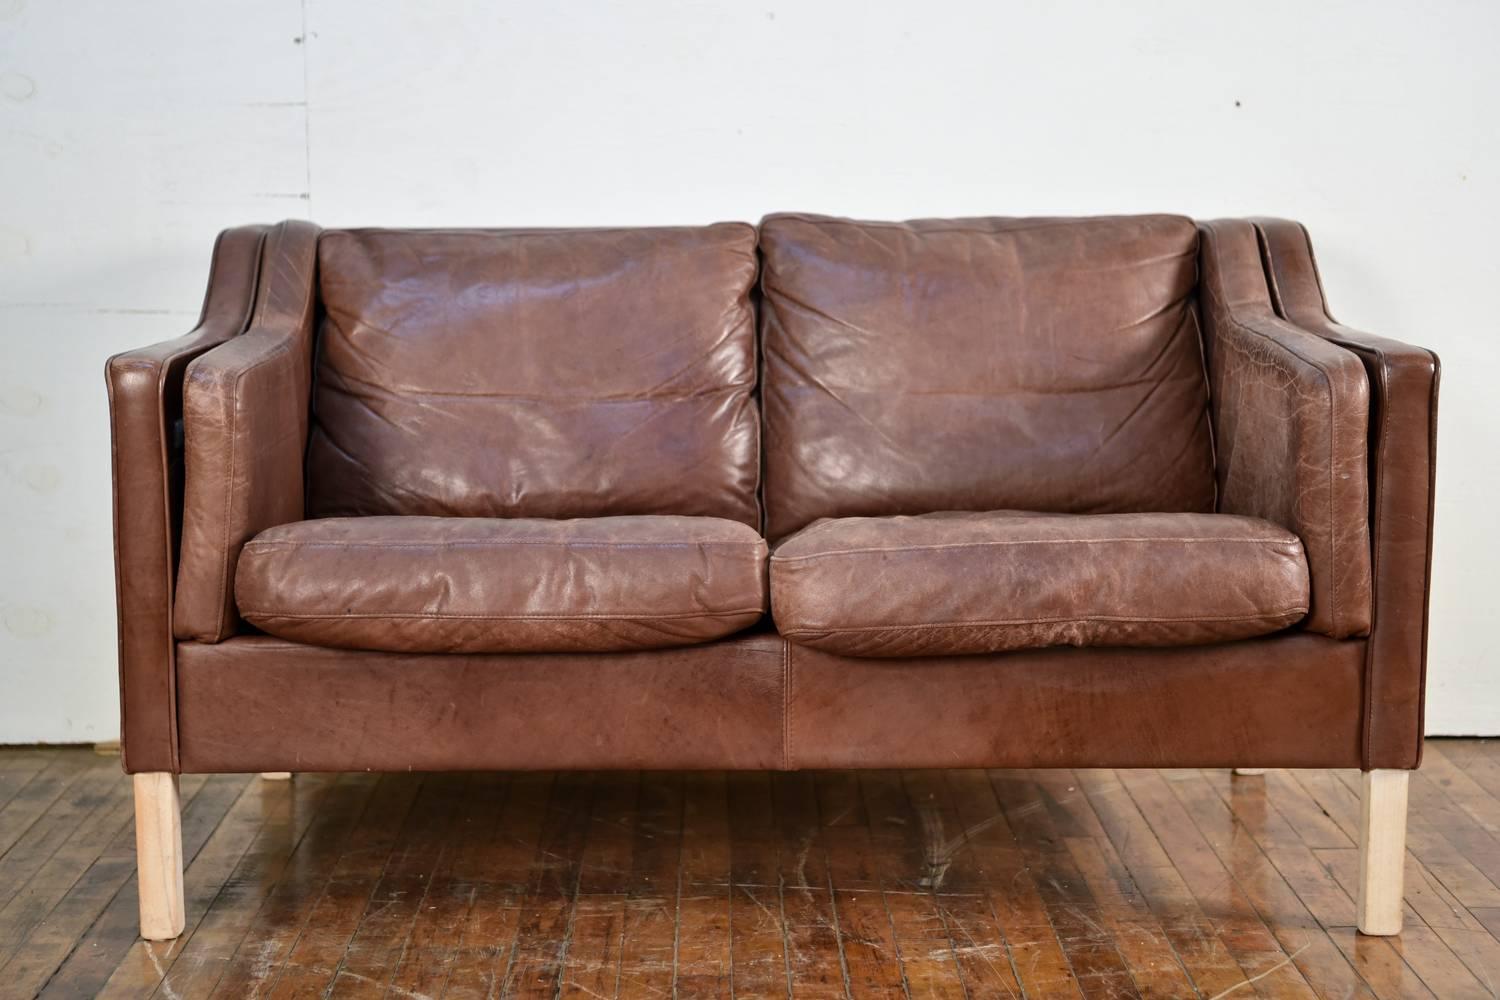 This sofa was designed by Mogens Hansen in the 1980s in the manner of Borge Mogensen.